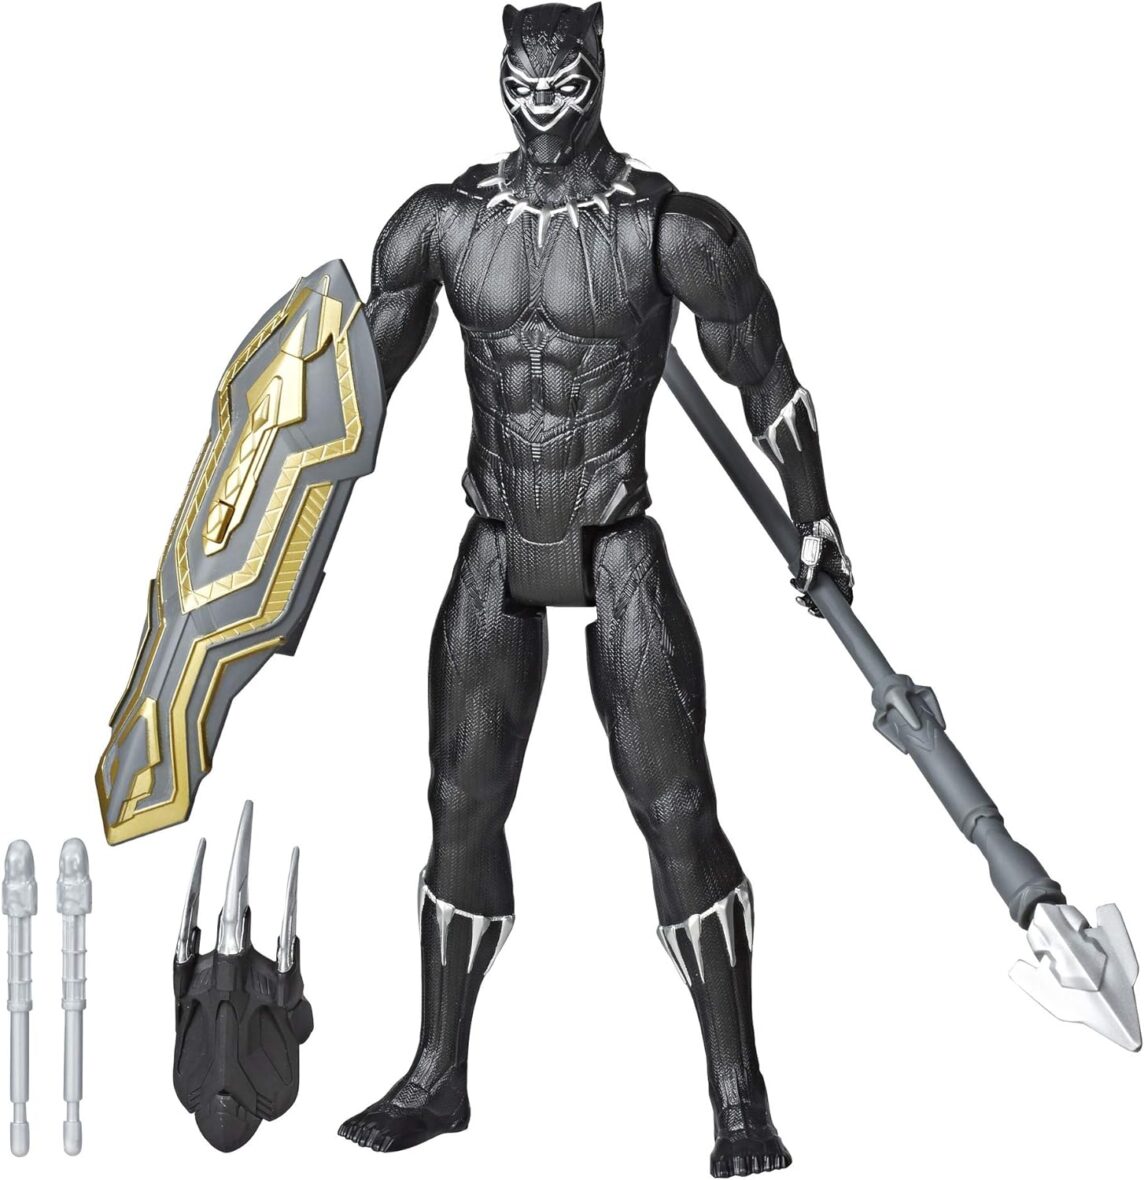 Avengers Titan Hero Series Blast Gear Deluxe Black Panther Action Figure, 12-Inch Toy